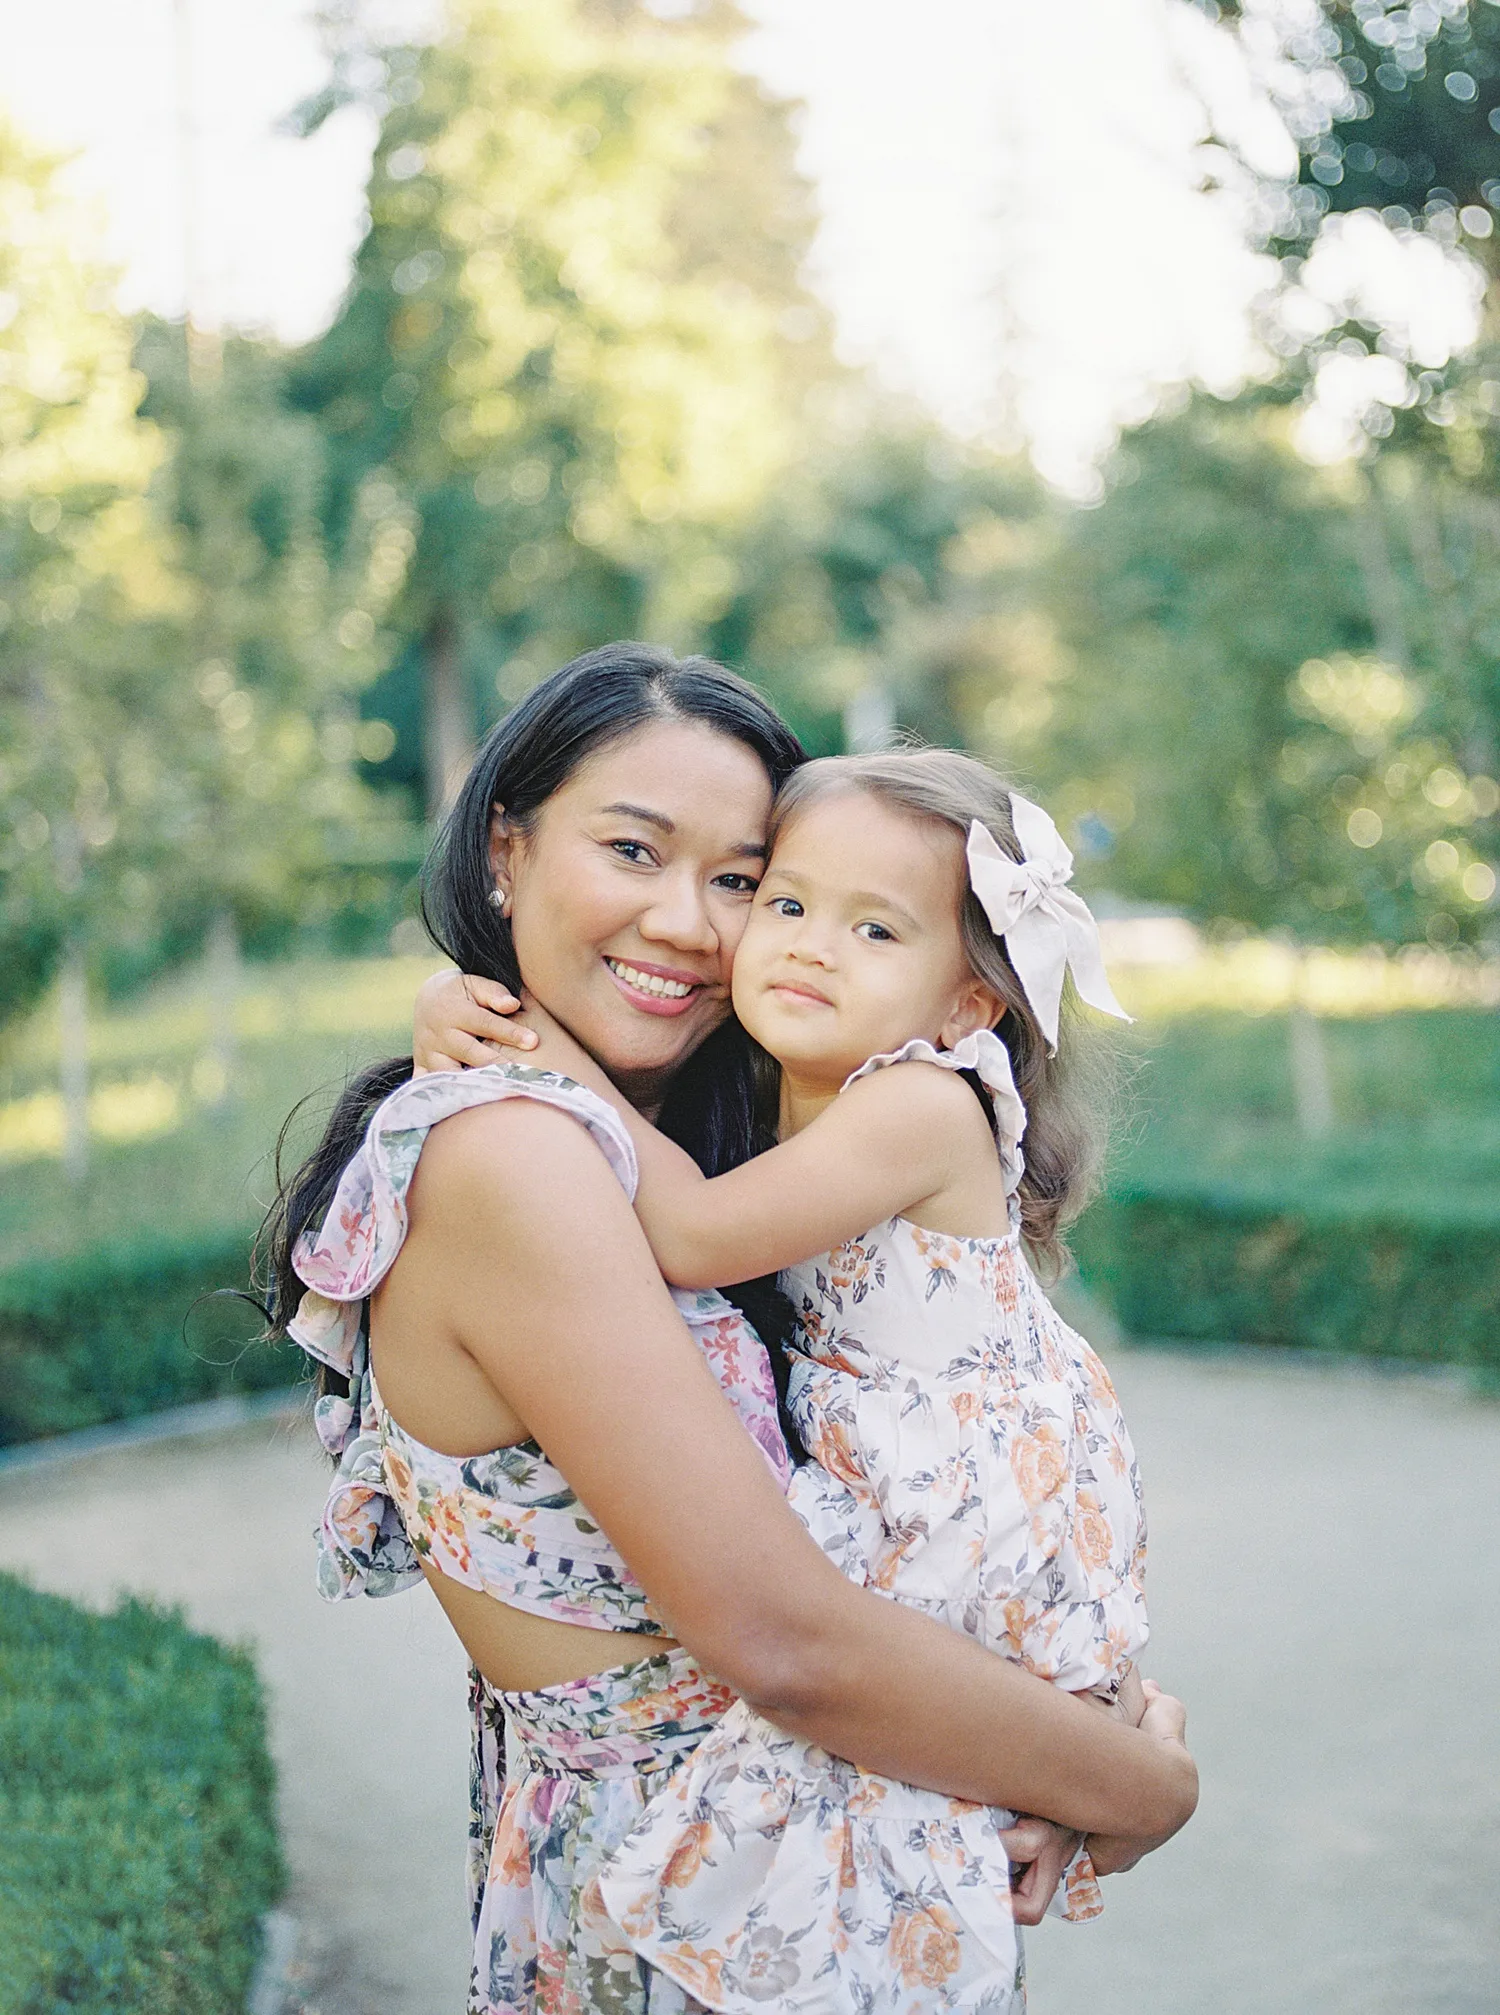 Mother and daughter portrait by Julia Shelepova - Palo Alto family photographer